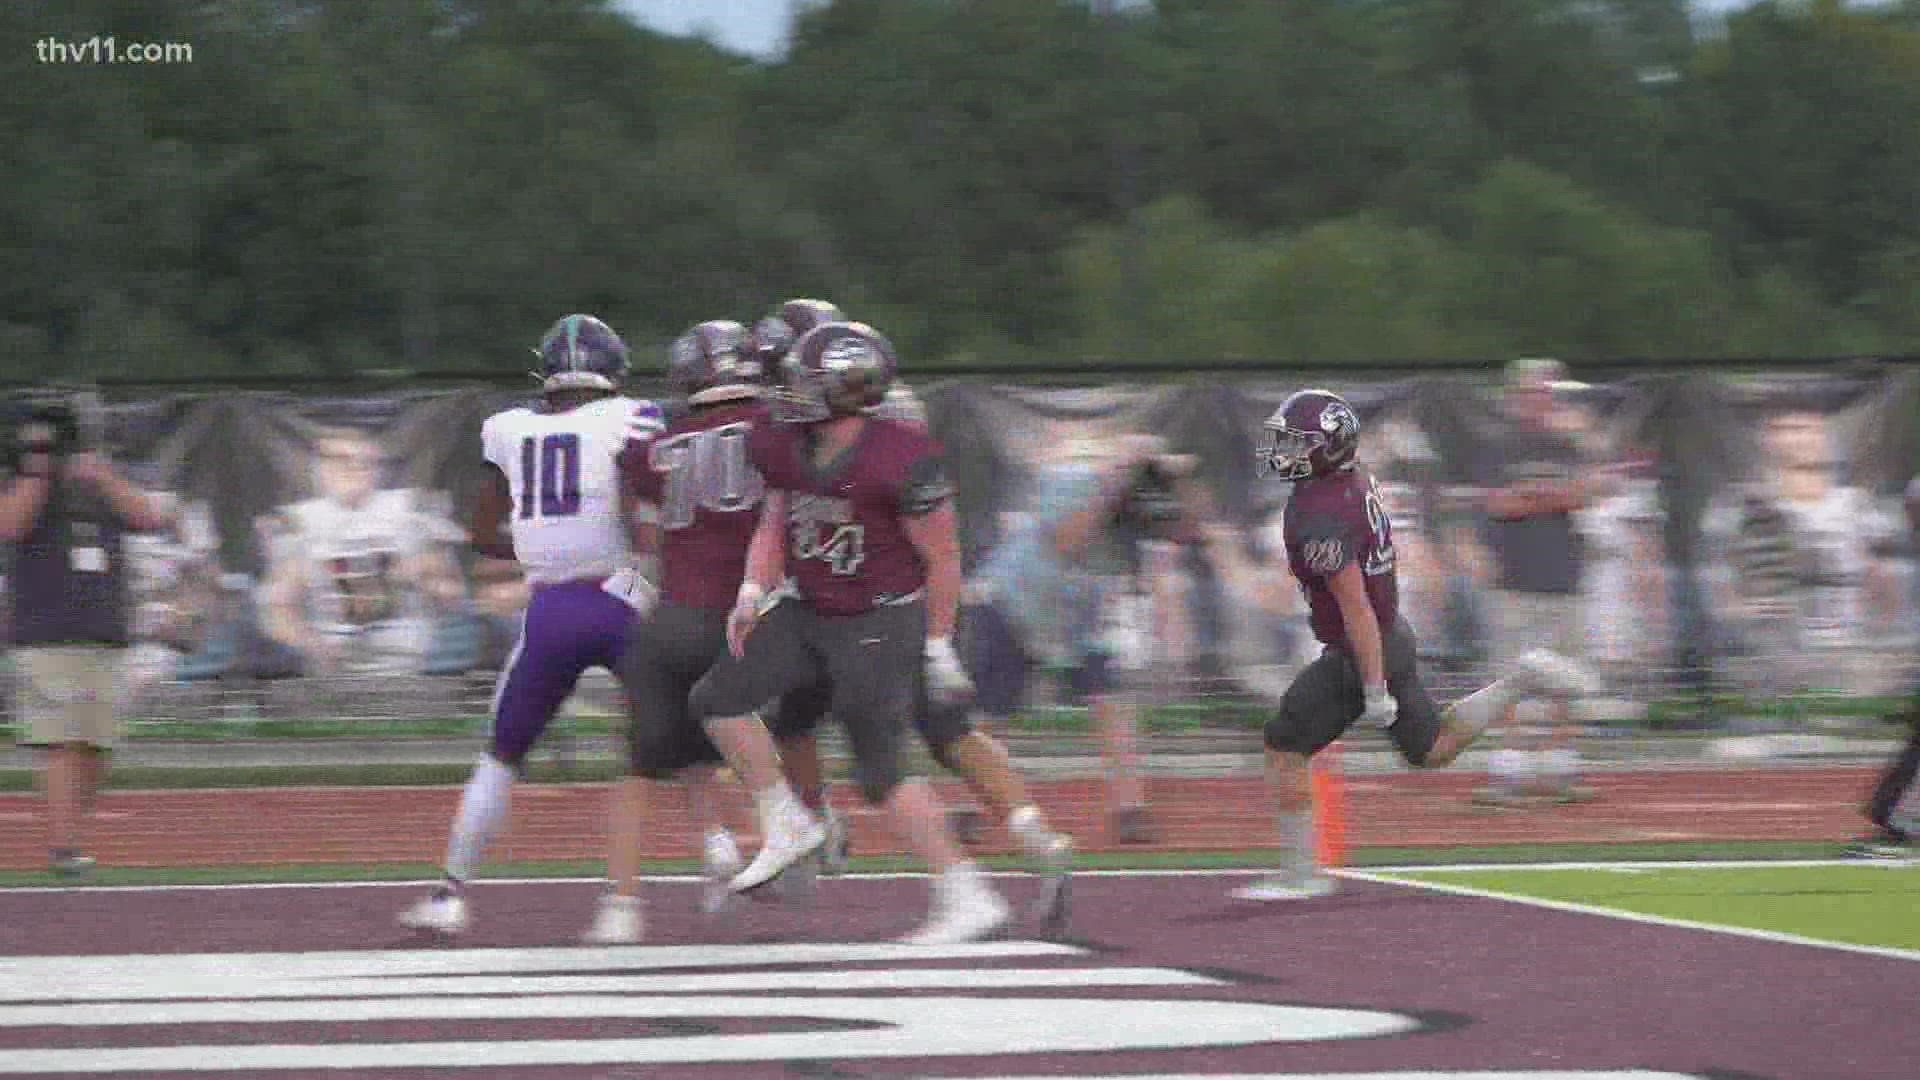 The Benton Panthers defeated the Little Rock Southwest Gryphons in a 63-19 victory.